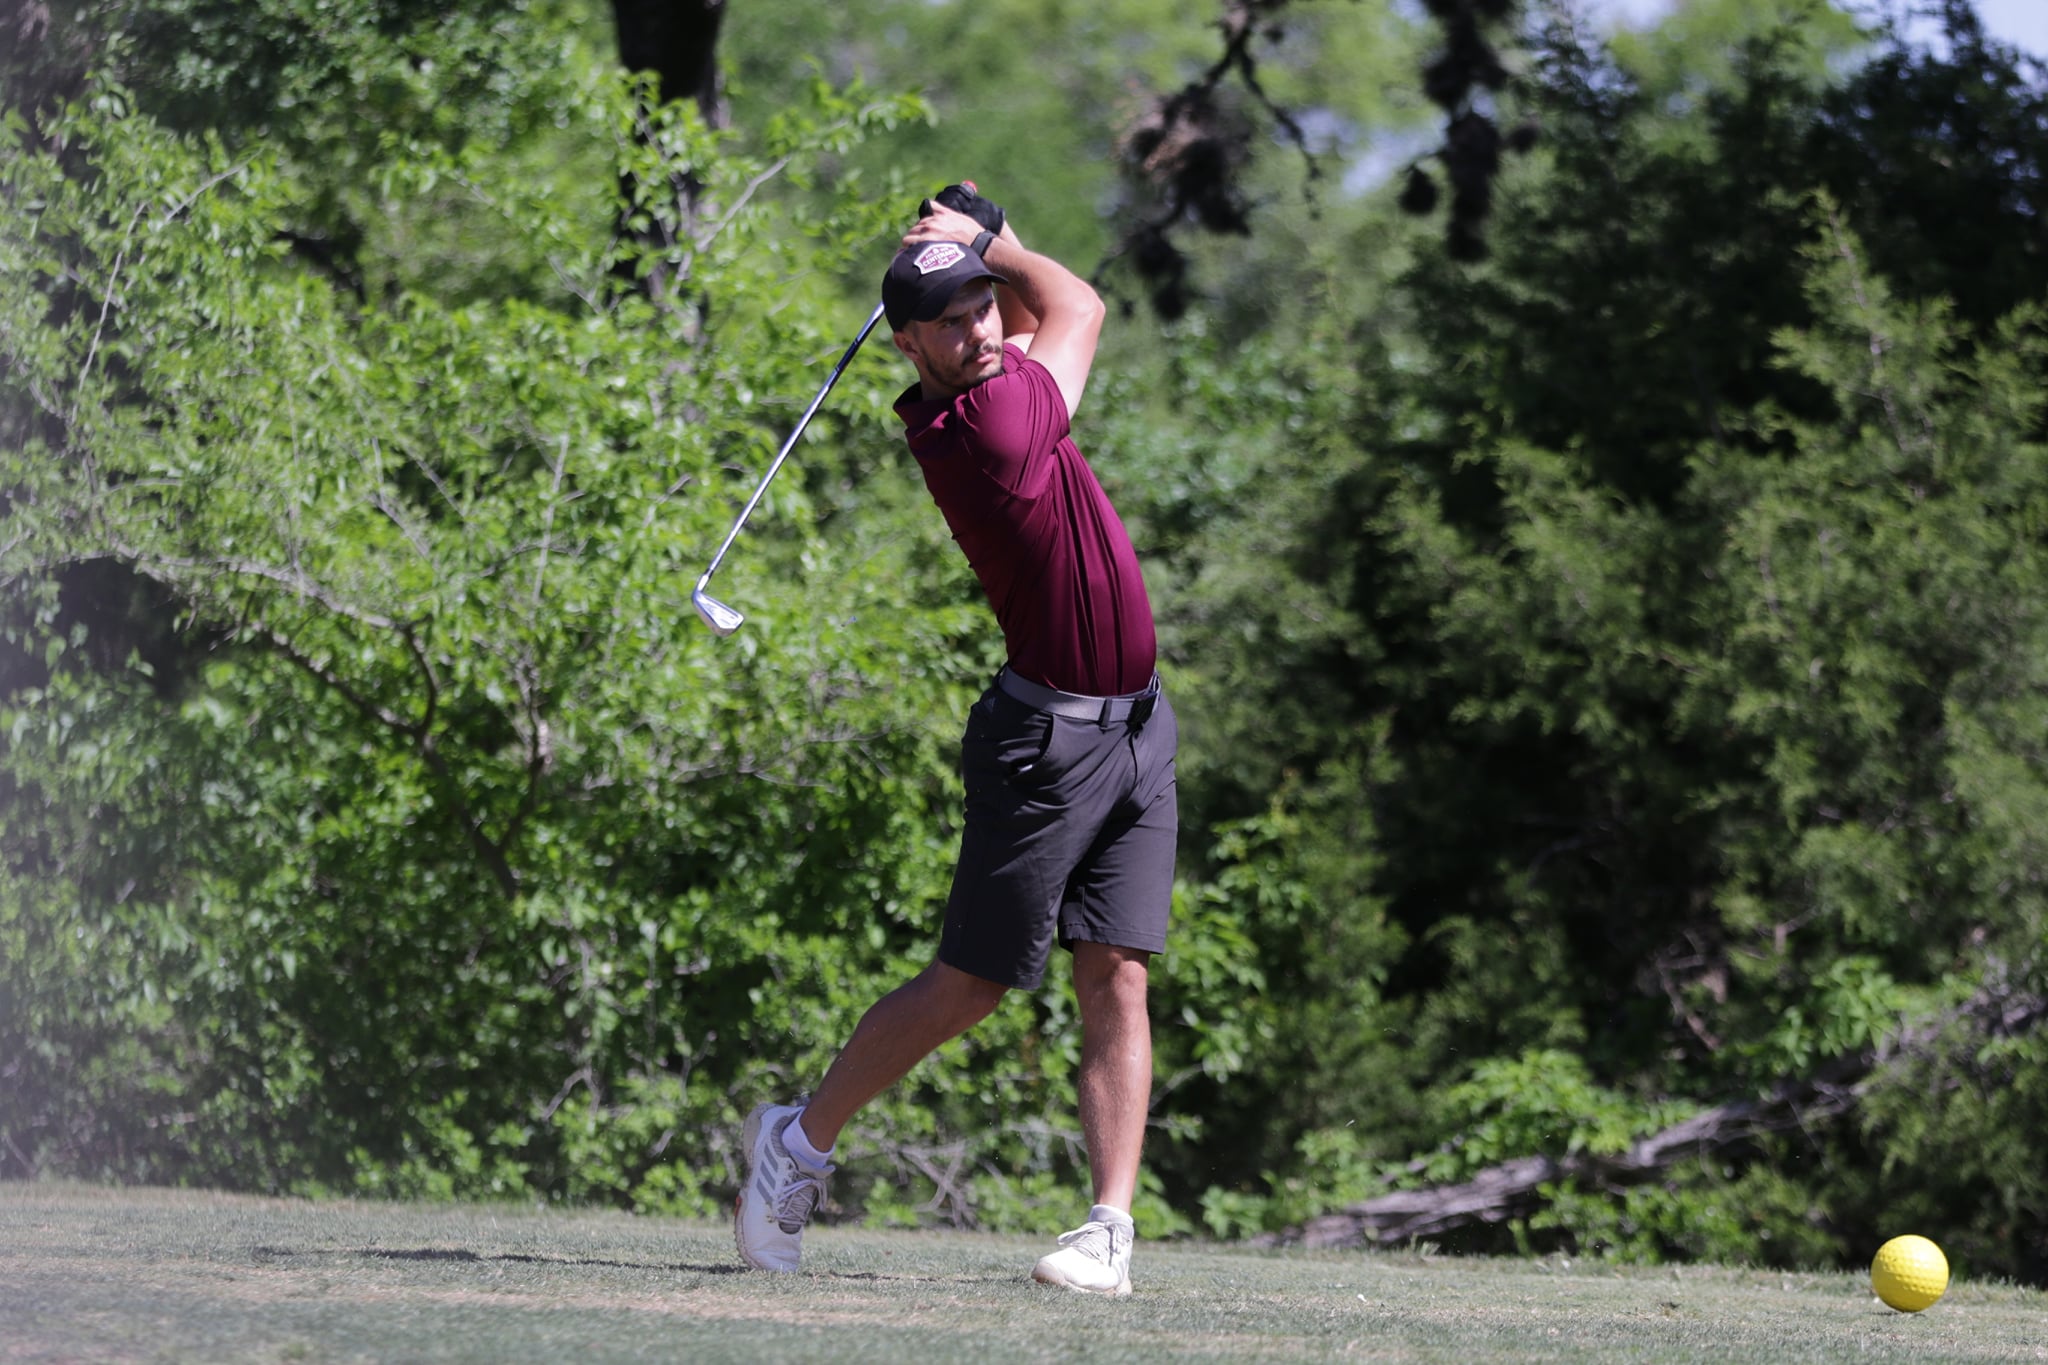 Gents Fifth After Round One Of Pinecrest Invitational; Polan Tied For Individual Lead